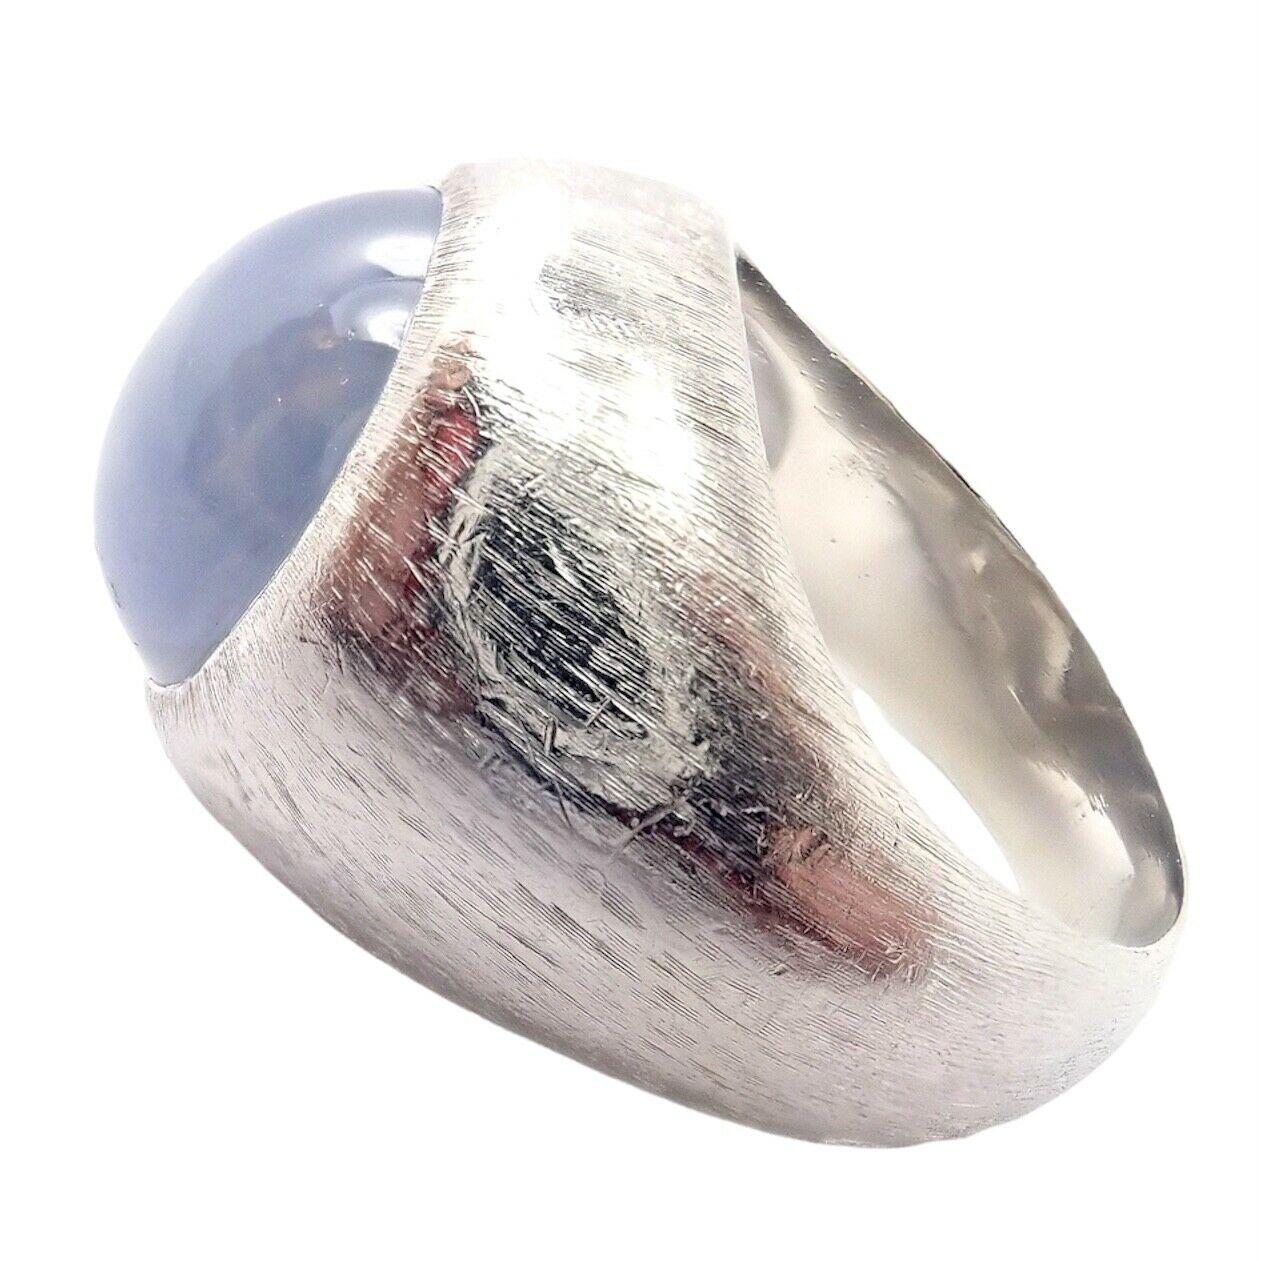 Platinum Large Cabochon Star Sapphire Vintage Ring by Buccellati. 
With 1 Large Star Sapphire - 12mm x 13mm.
Details: 
Ring Size: 9
Weight: 34.3 grams
Stamped Hallmarks: Buccellati Platinum (Faint)
YOUR PRICE: $10,000
Ti844eodd